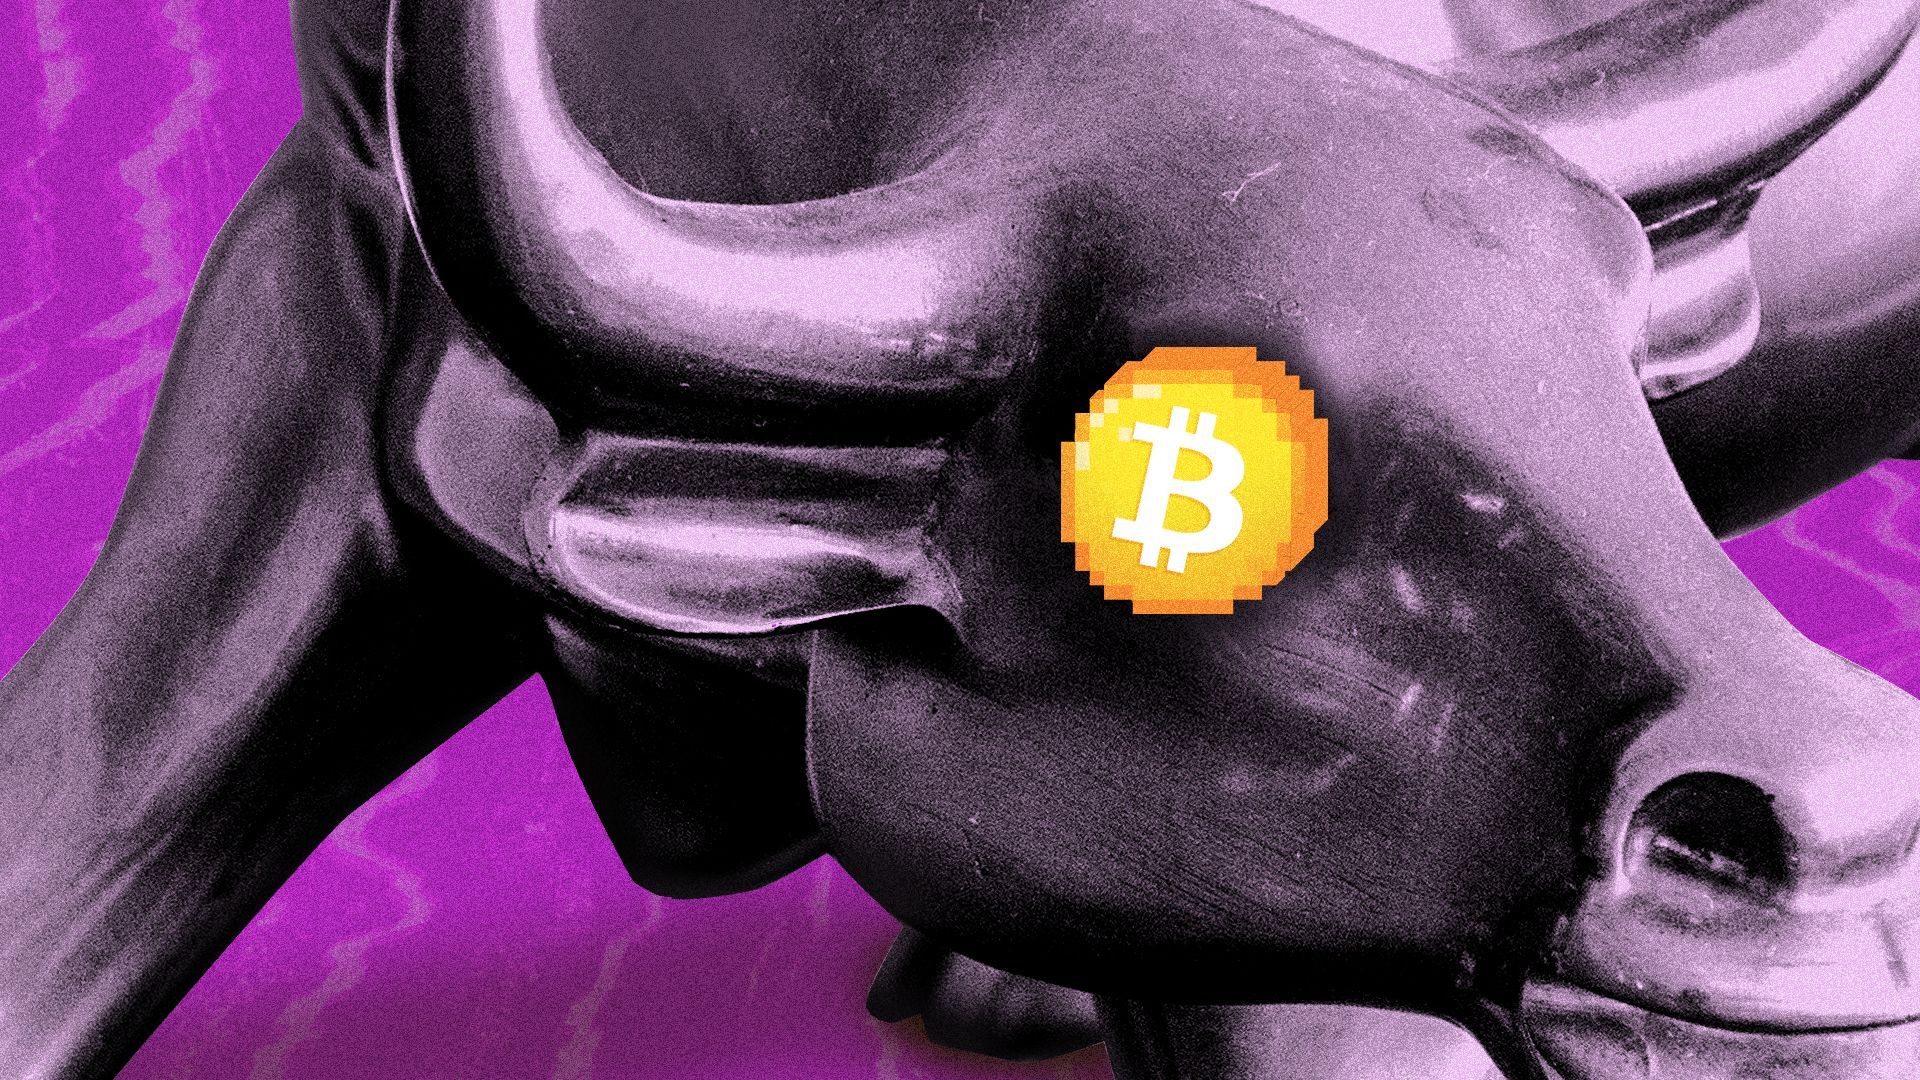 Illustration of the Wall Street bull statue with a Bitcoin as an eye.